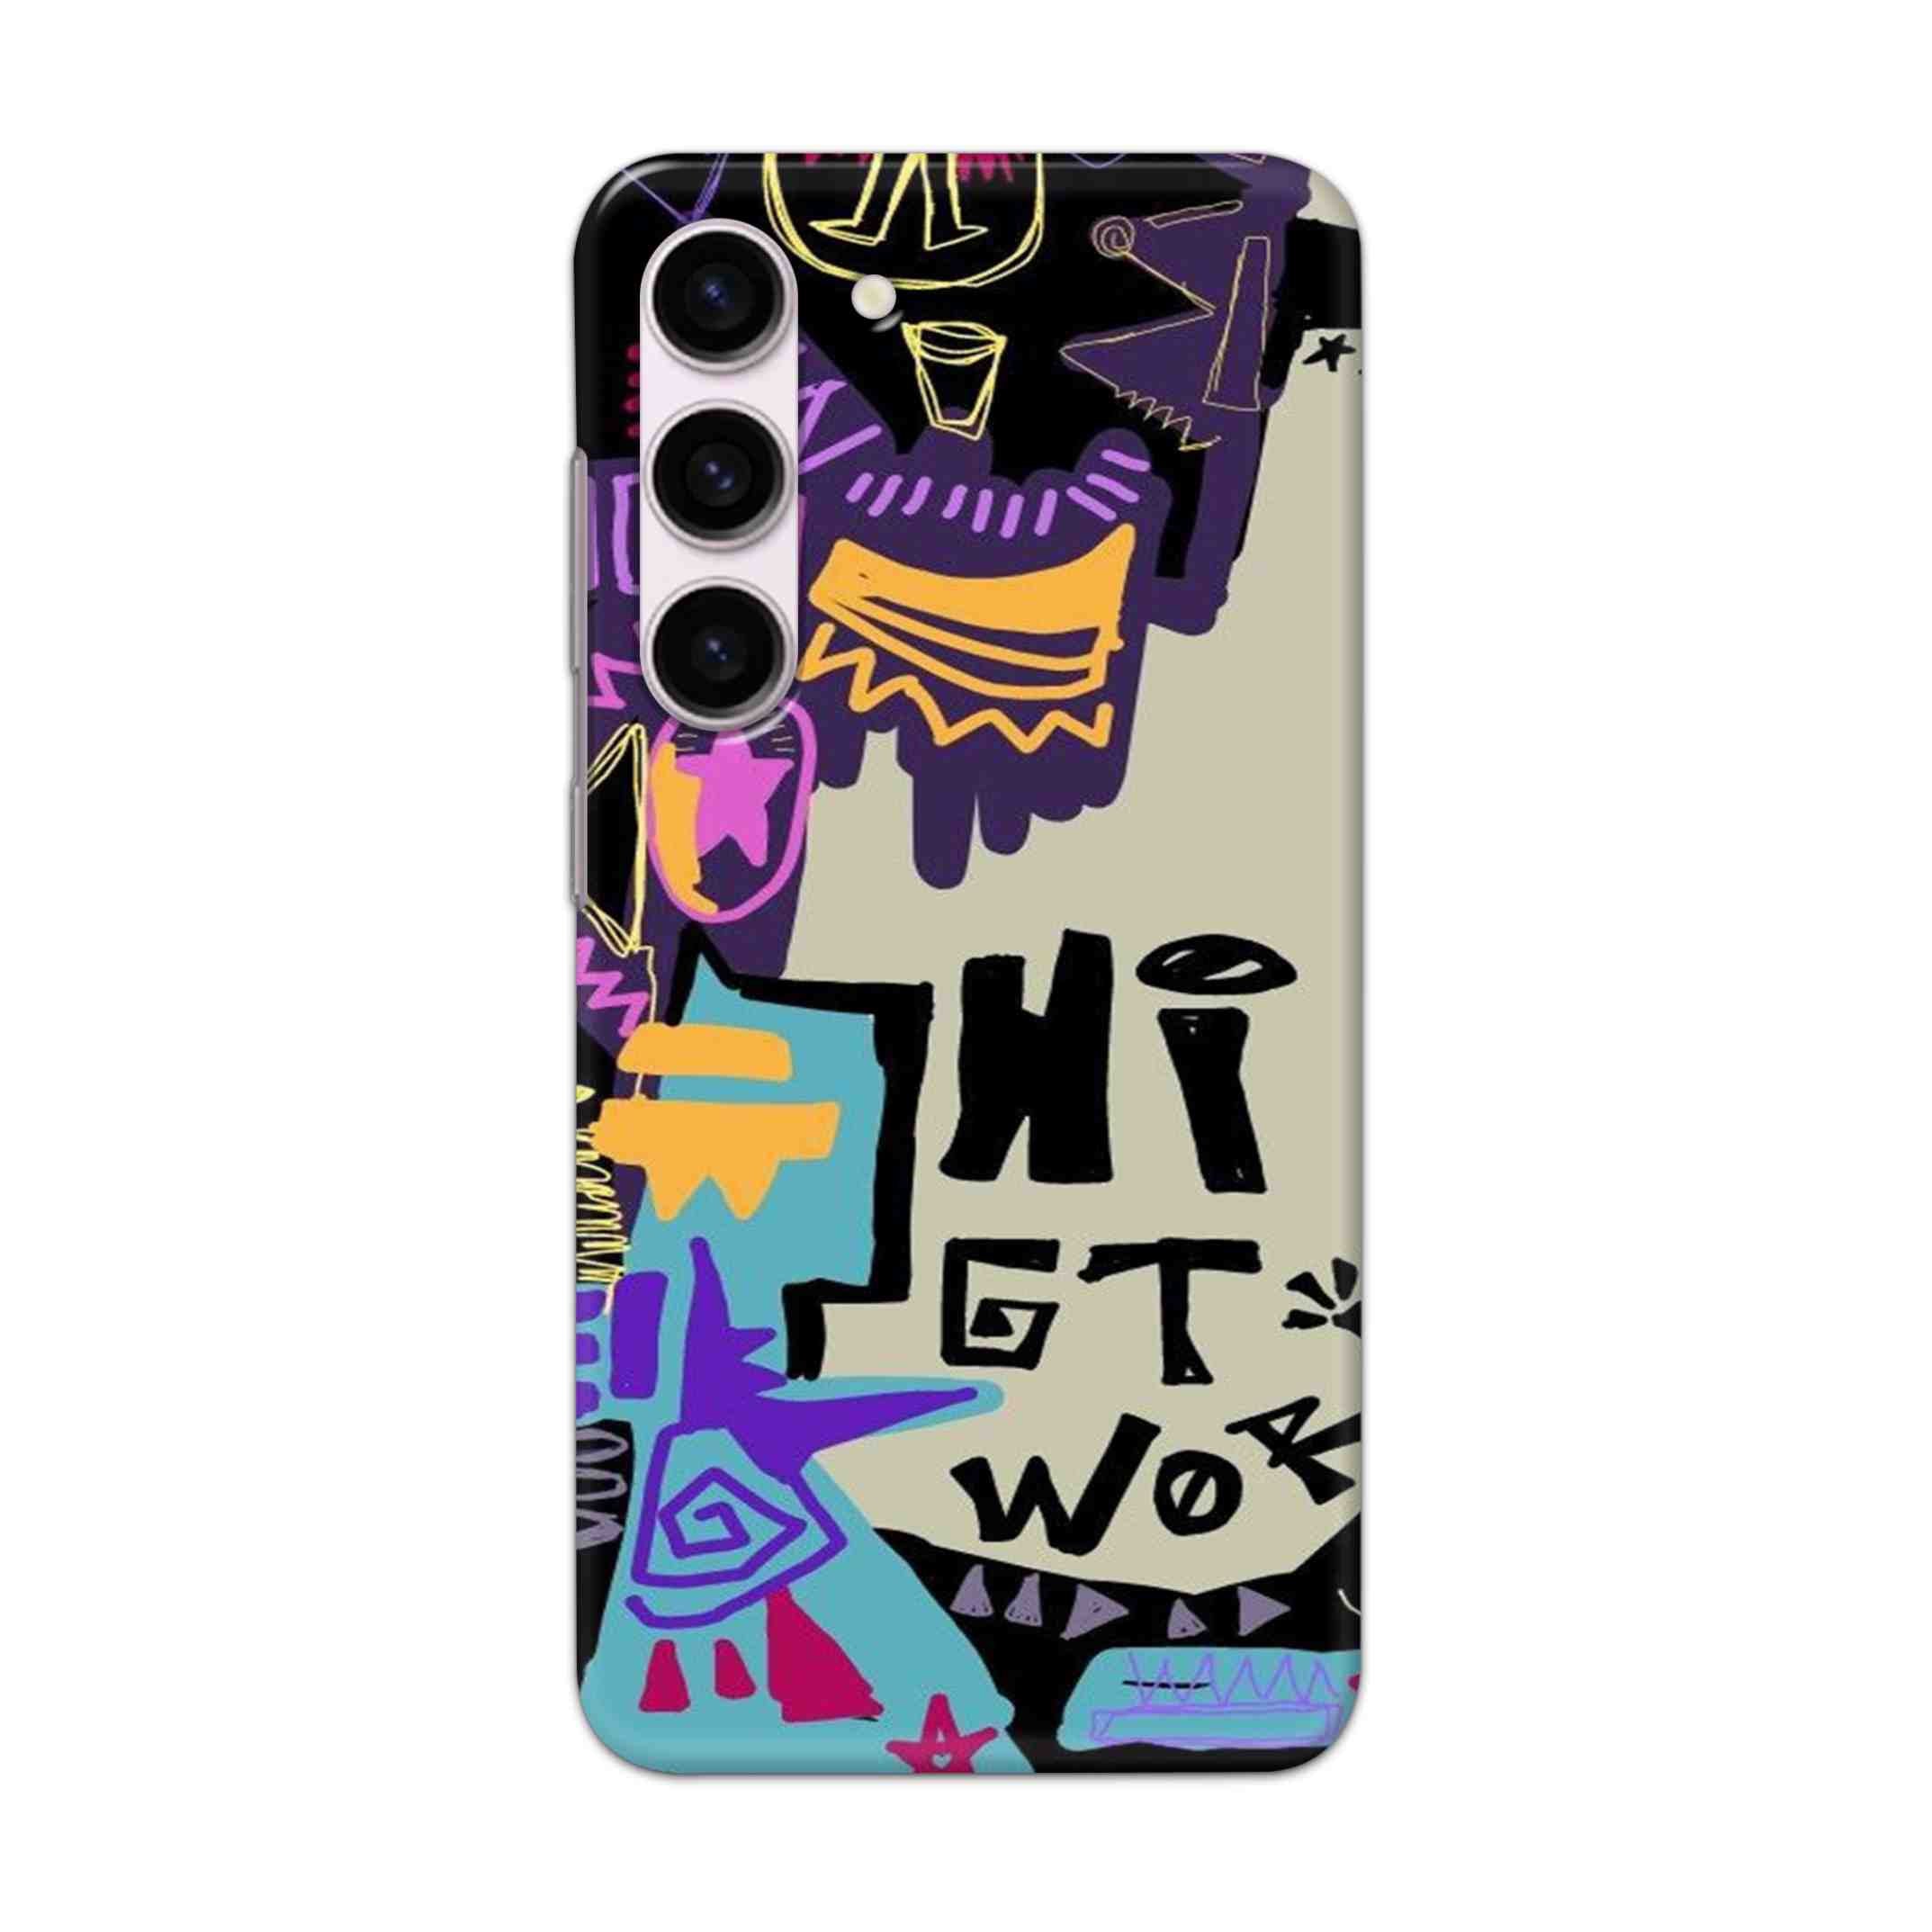 Buy Hi Gt World Hard Back Mobile Phone Case Cover For Samsung Galaxy S23 Online